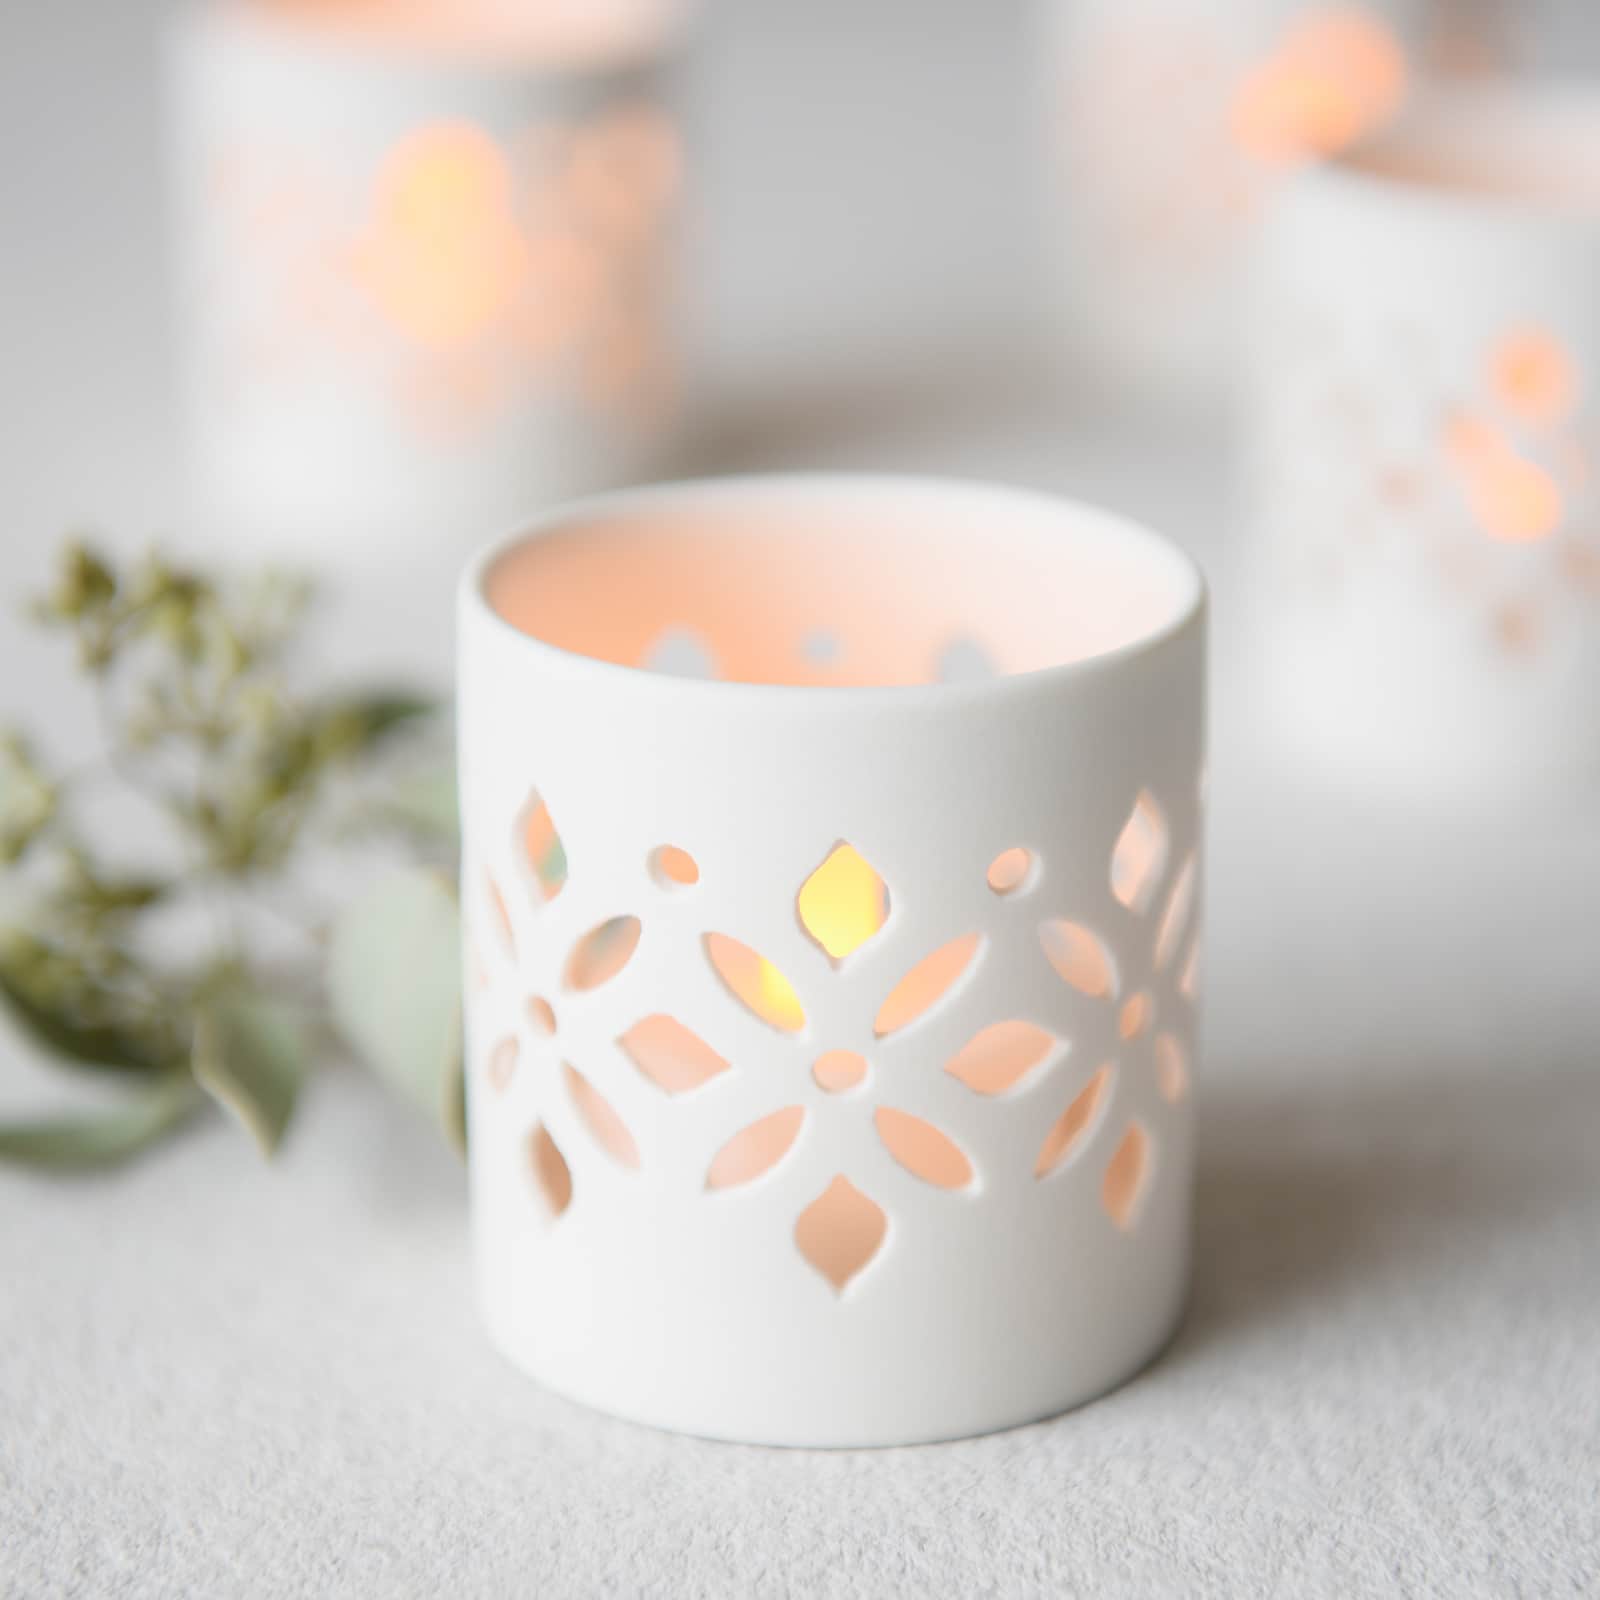 Buy the Style Me Pretty Ceramic Votive Candle Holders, 12ct. at Michaels